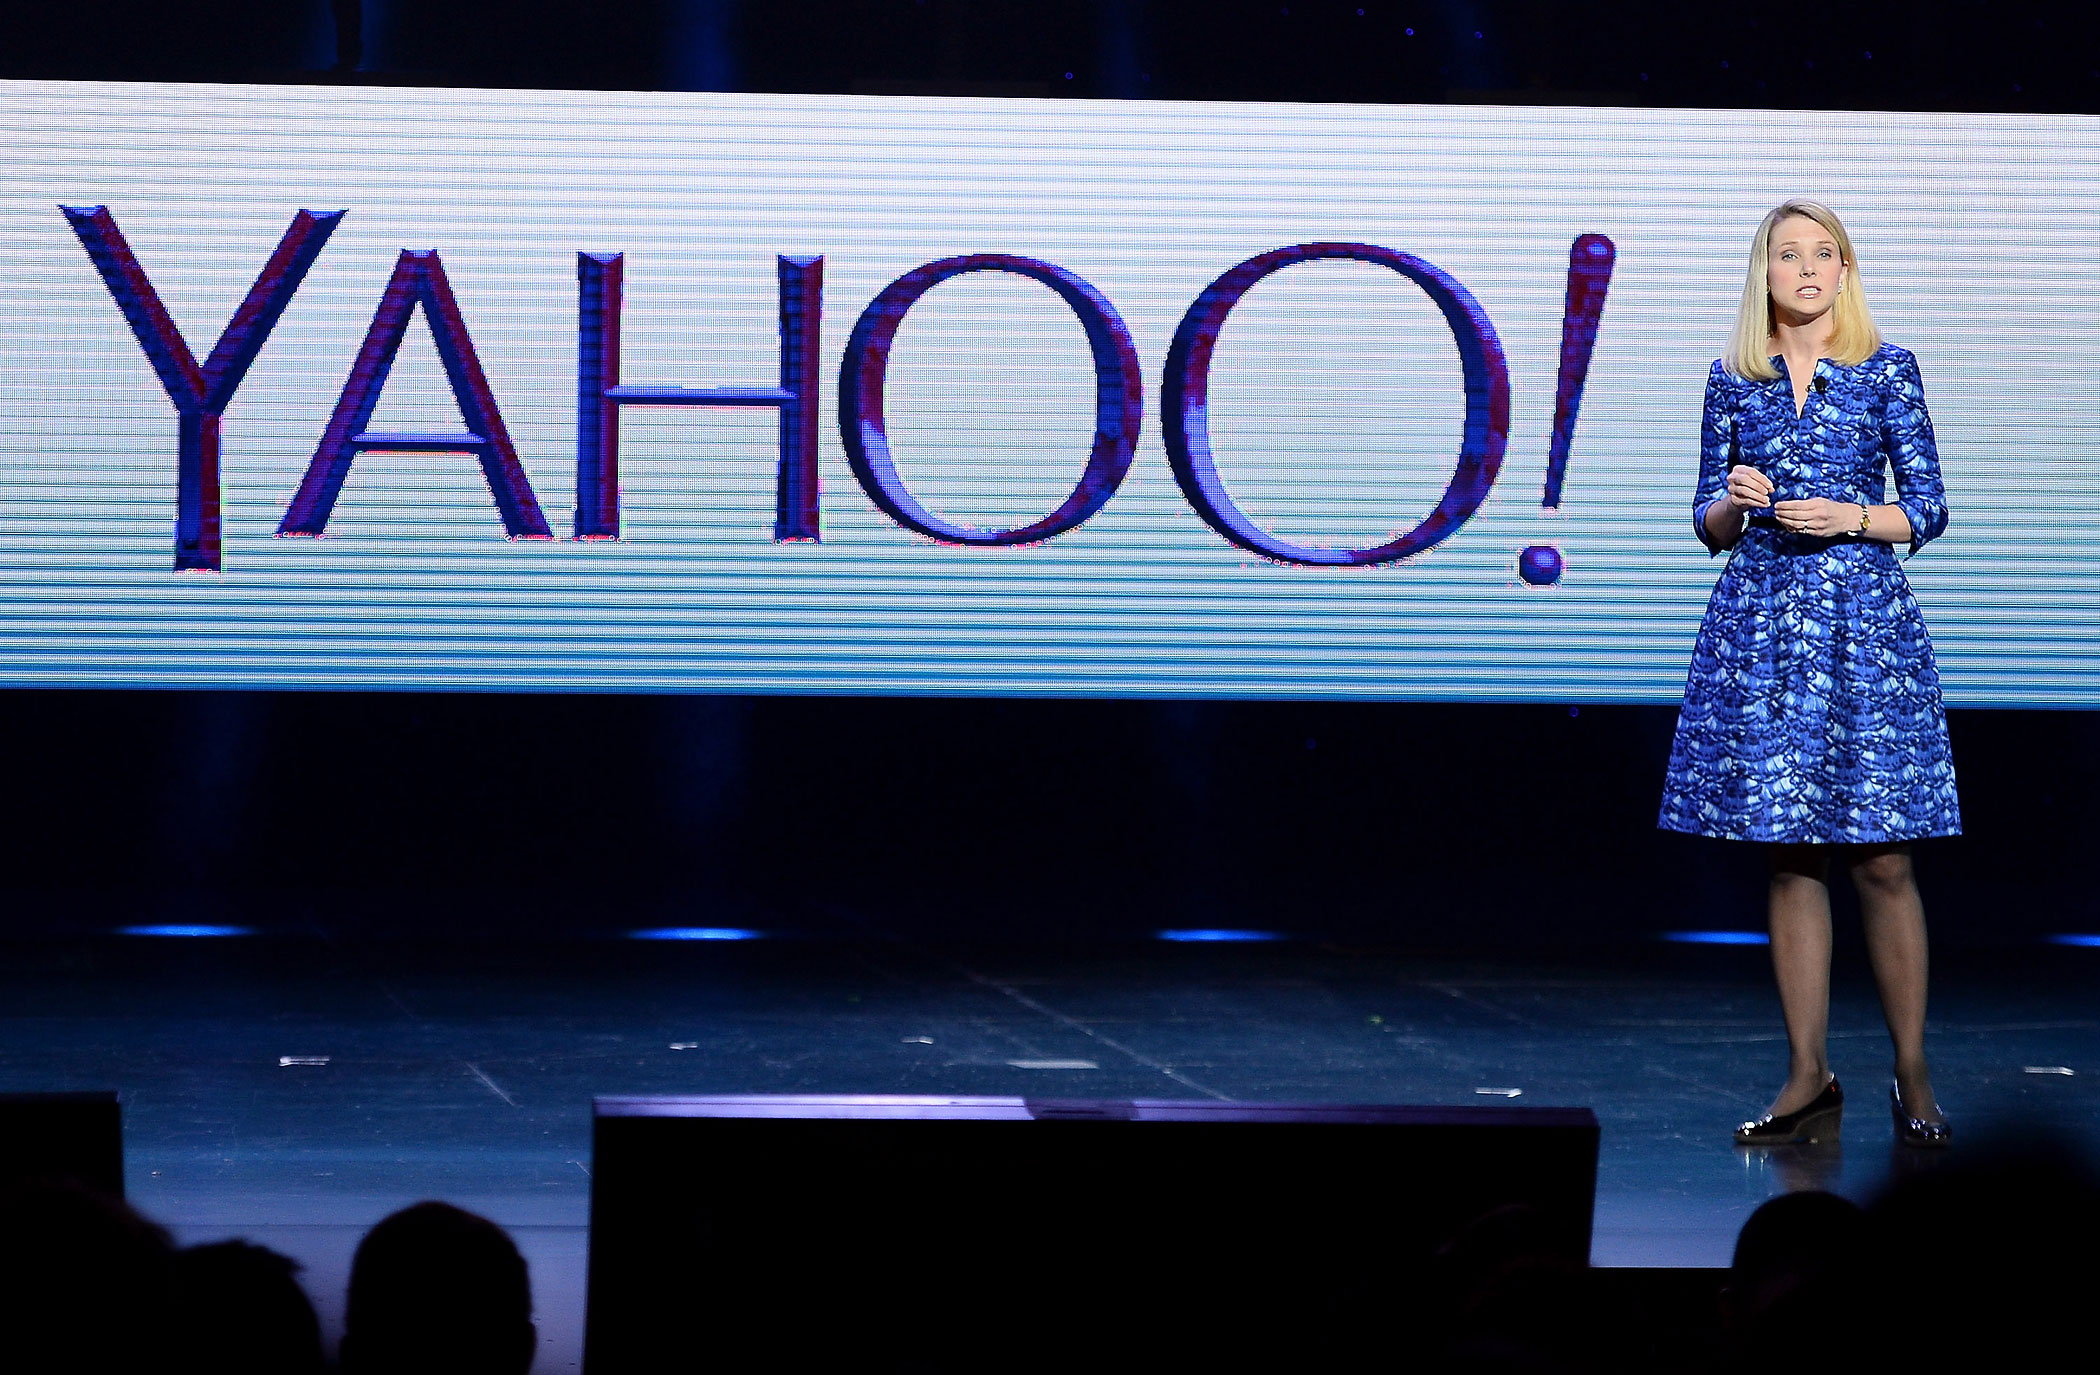 Yahoo! President and CEO Marissa Mayer delivers a keynote address at the 2014 International CES on Jan. 7, 2014 in Las Vegas, NV. (Ethan Miller—Getty Images)